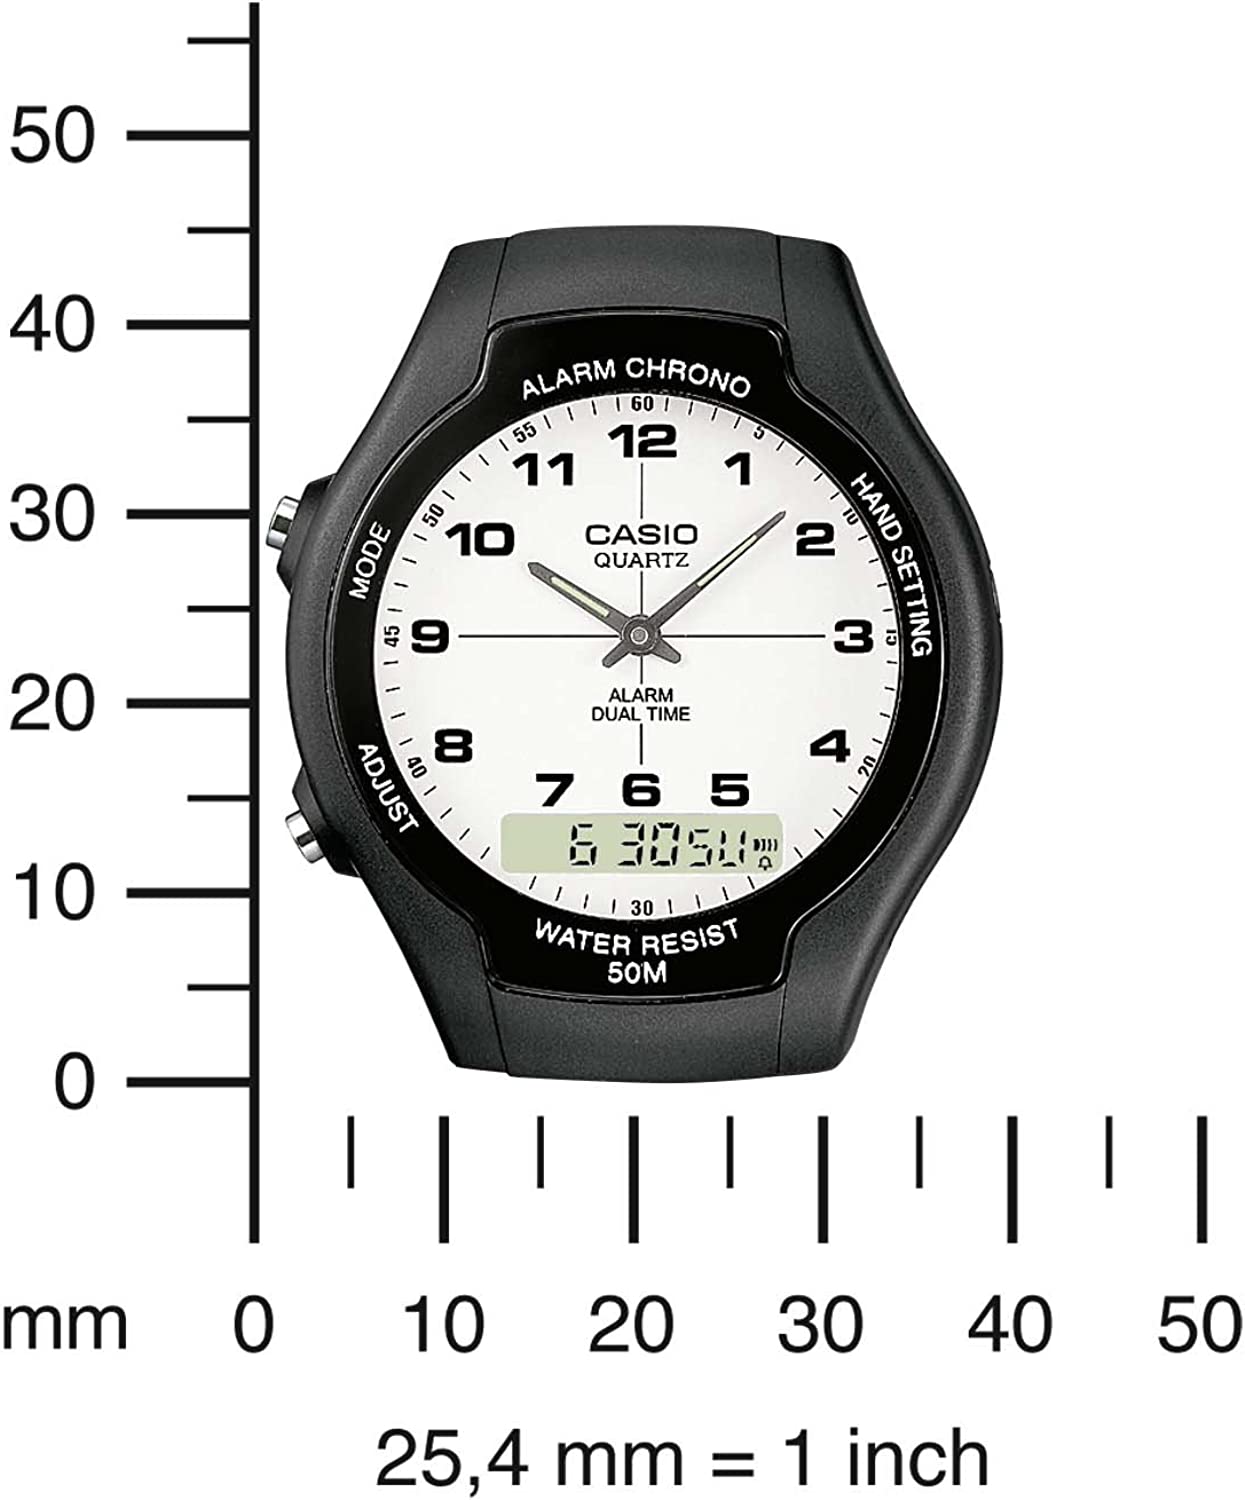 Casio Watch Black and White AW-90H-7BVDF